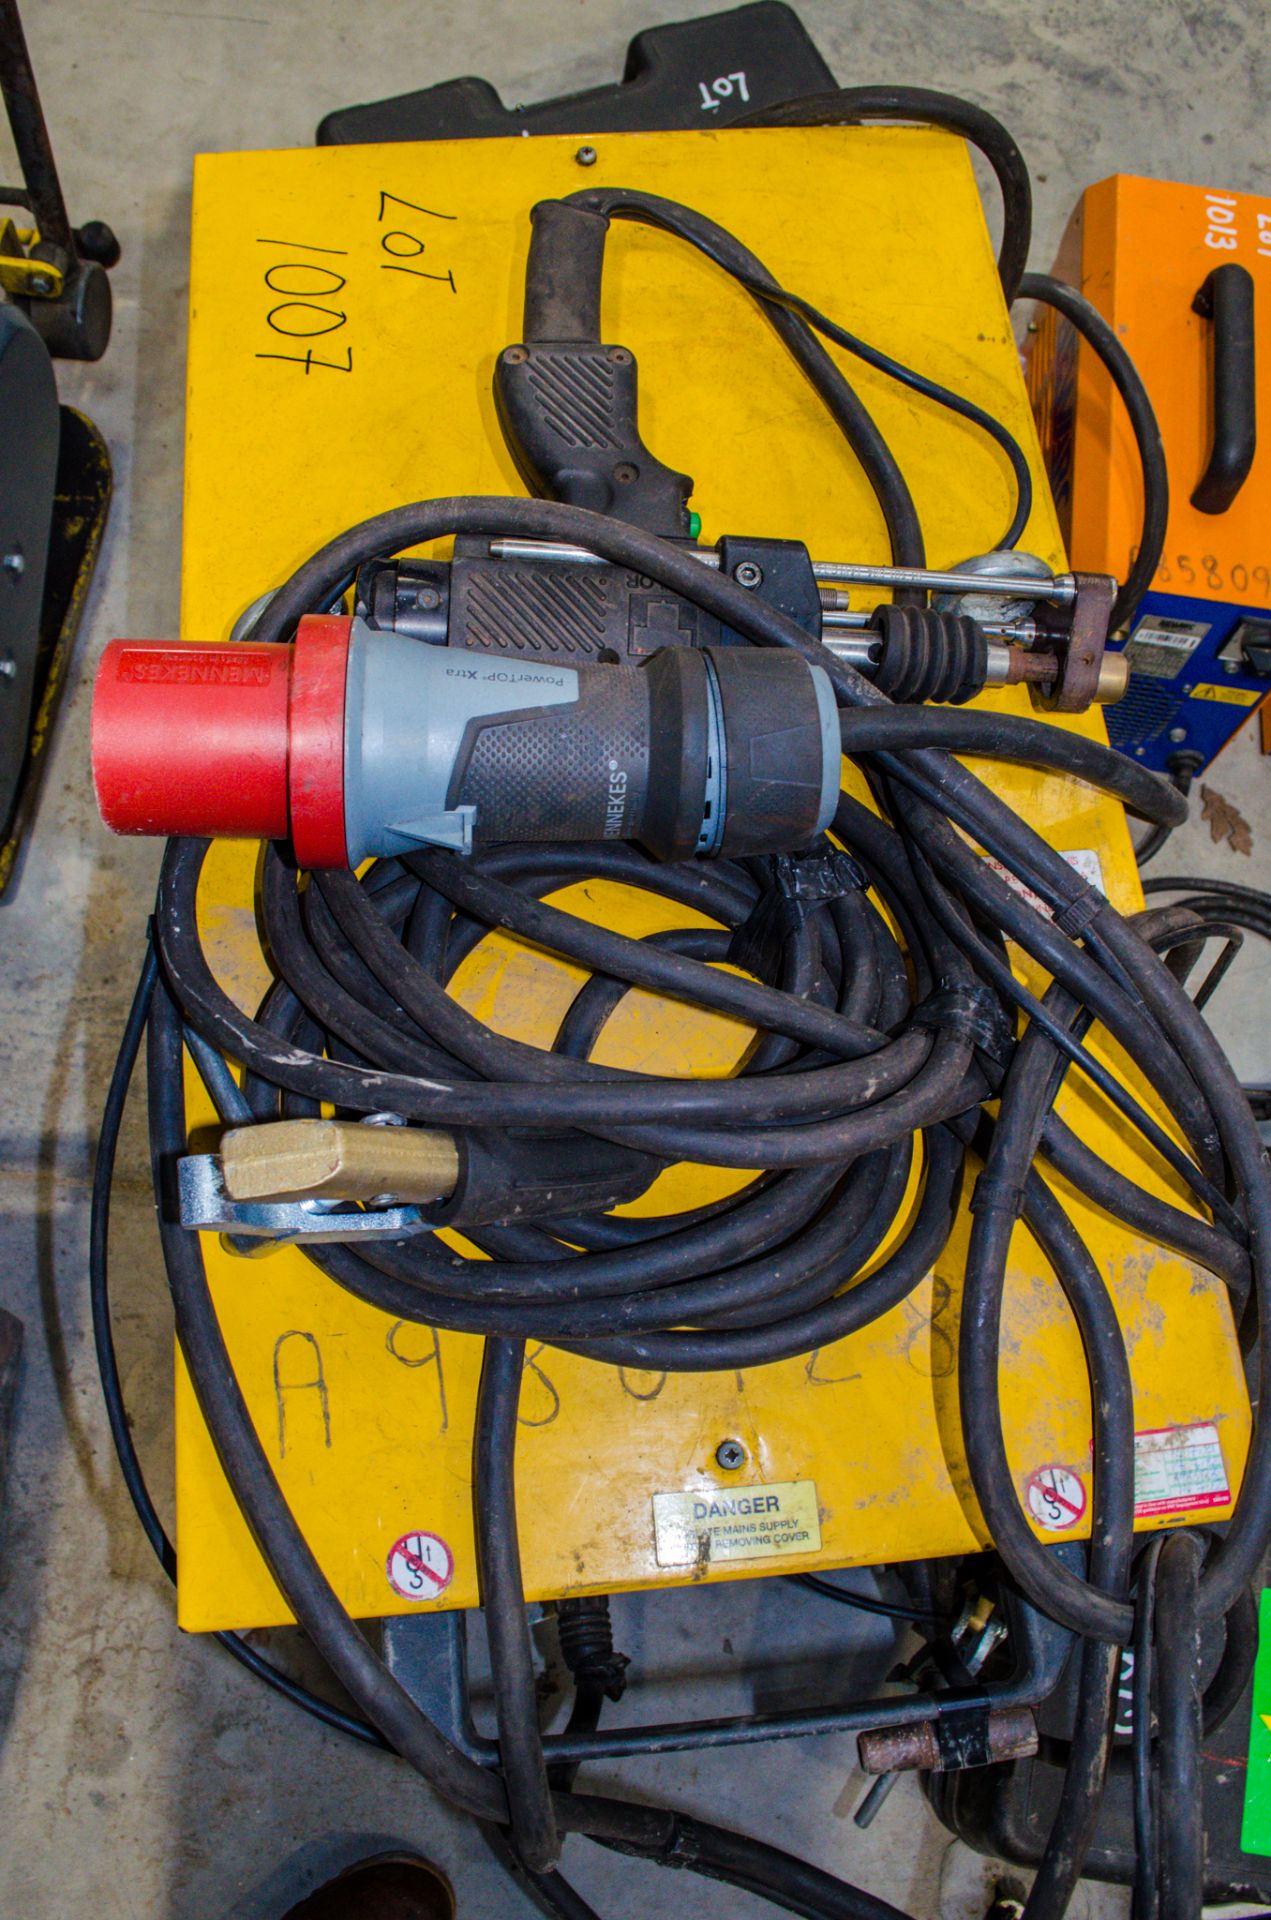 Taylor ARC400 3 phase arc welding set A986128 - Image 2 of 2